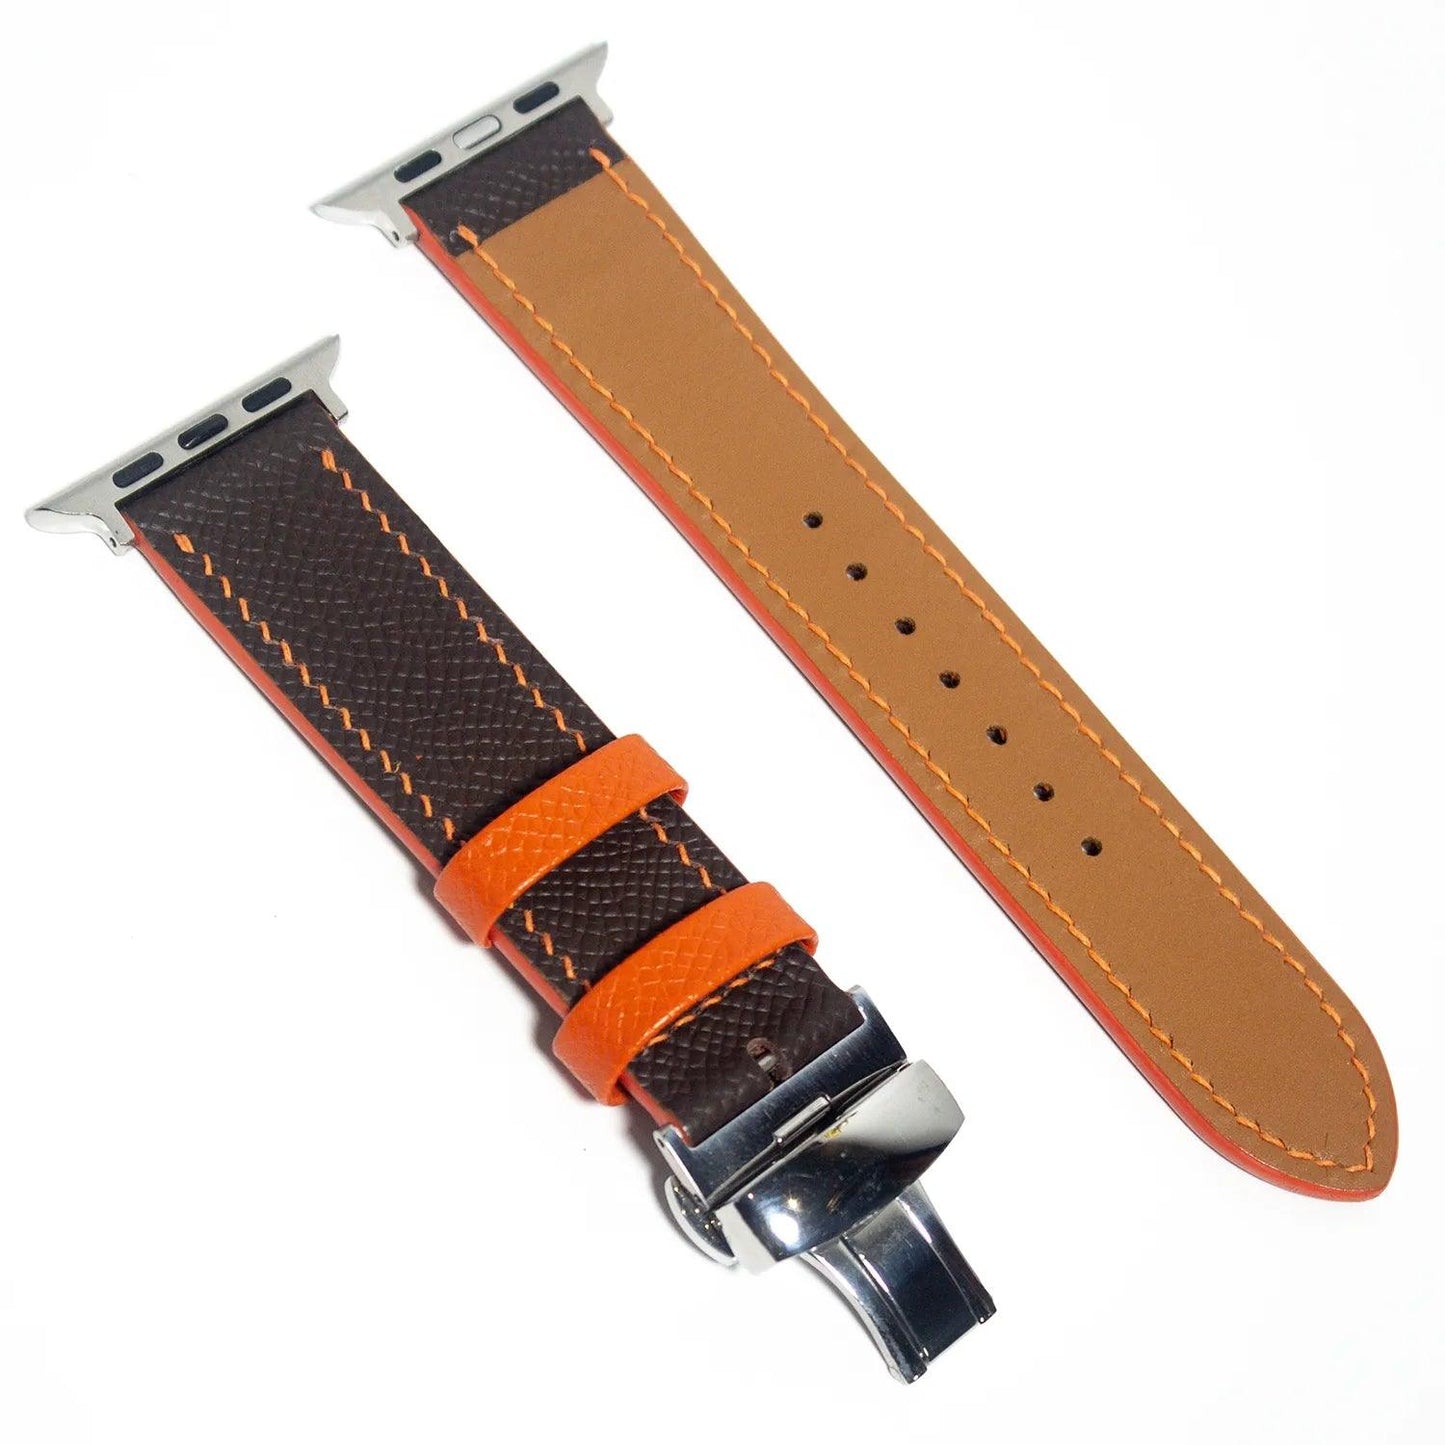 Stylish leather watch bands crafted from brown Epsom leather with eye-catching orange stitching, adding a pop of color.